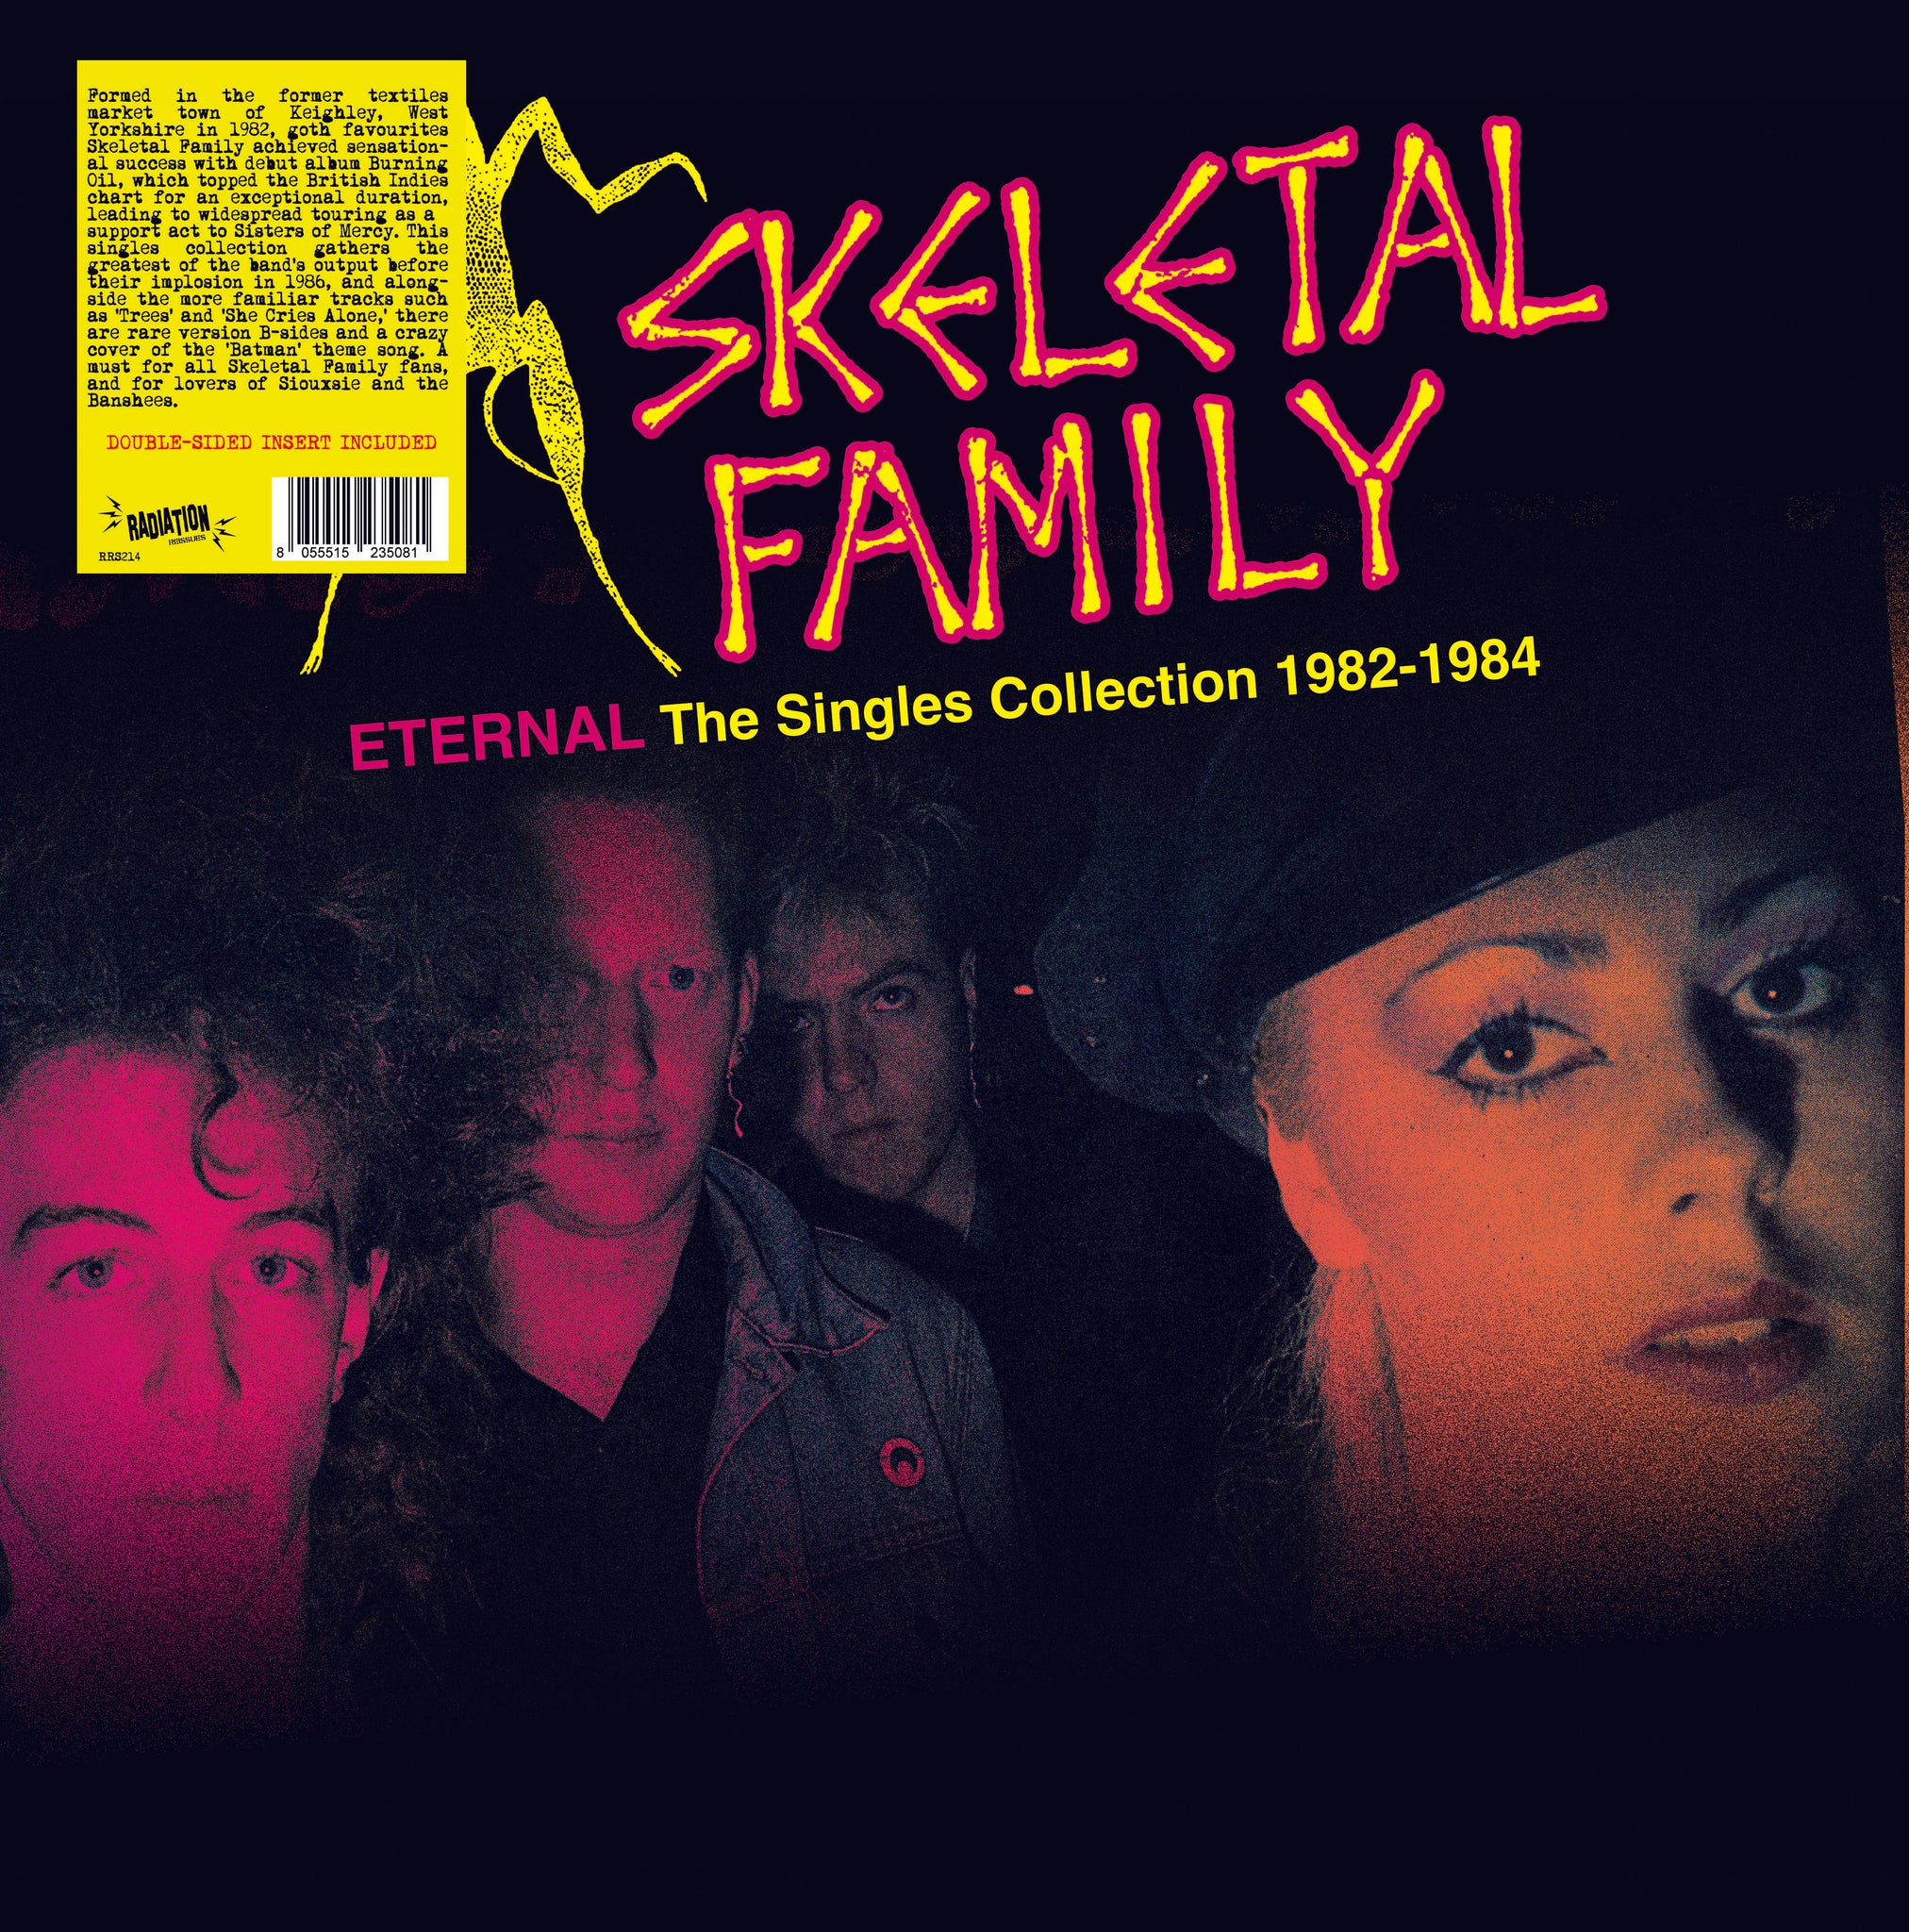 Skeletal Family "Eternal: The Singles Collection 1982-1984" LP